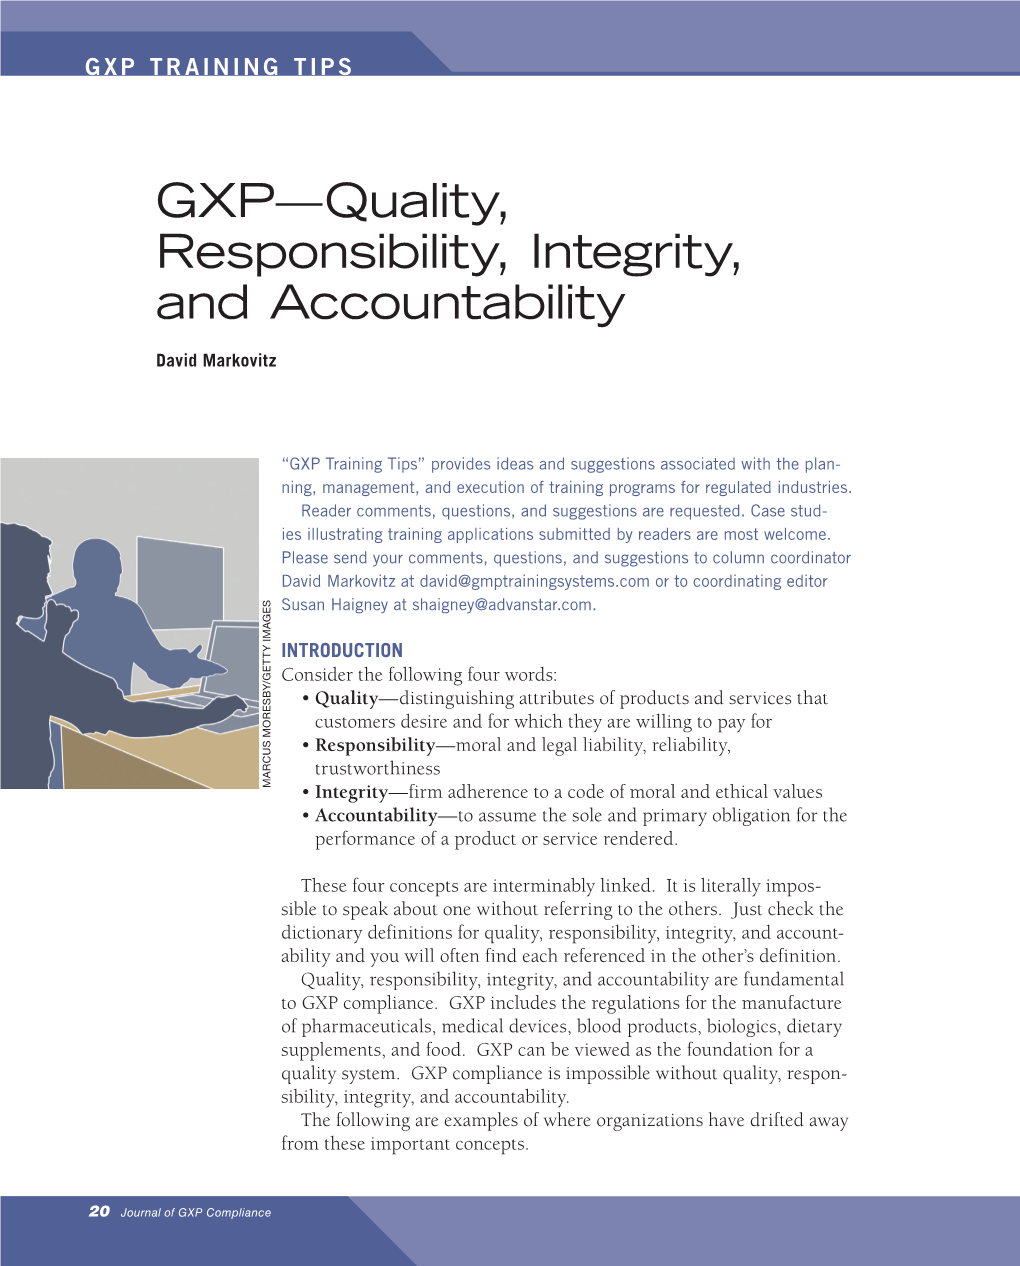 GXP—Quality, Responsibility, Integrity, and Accountability